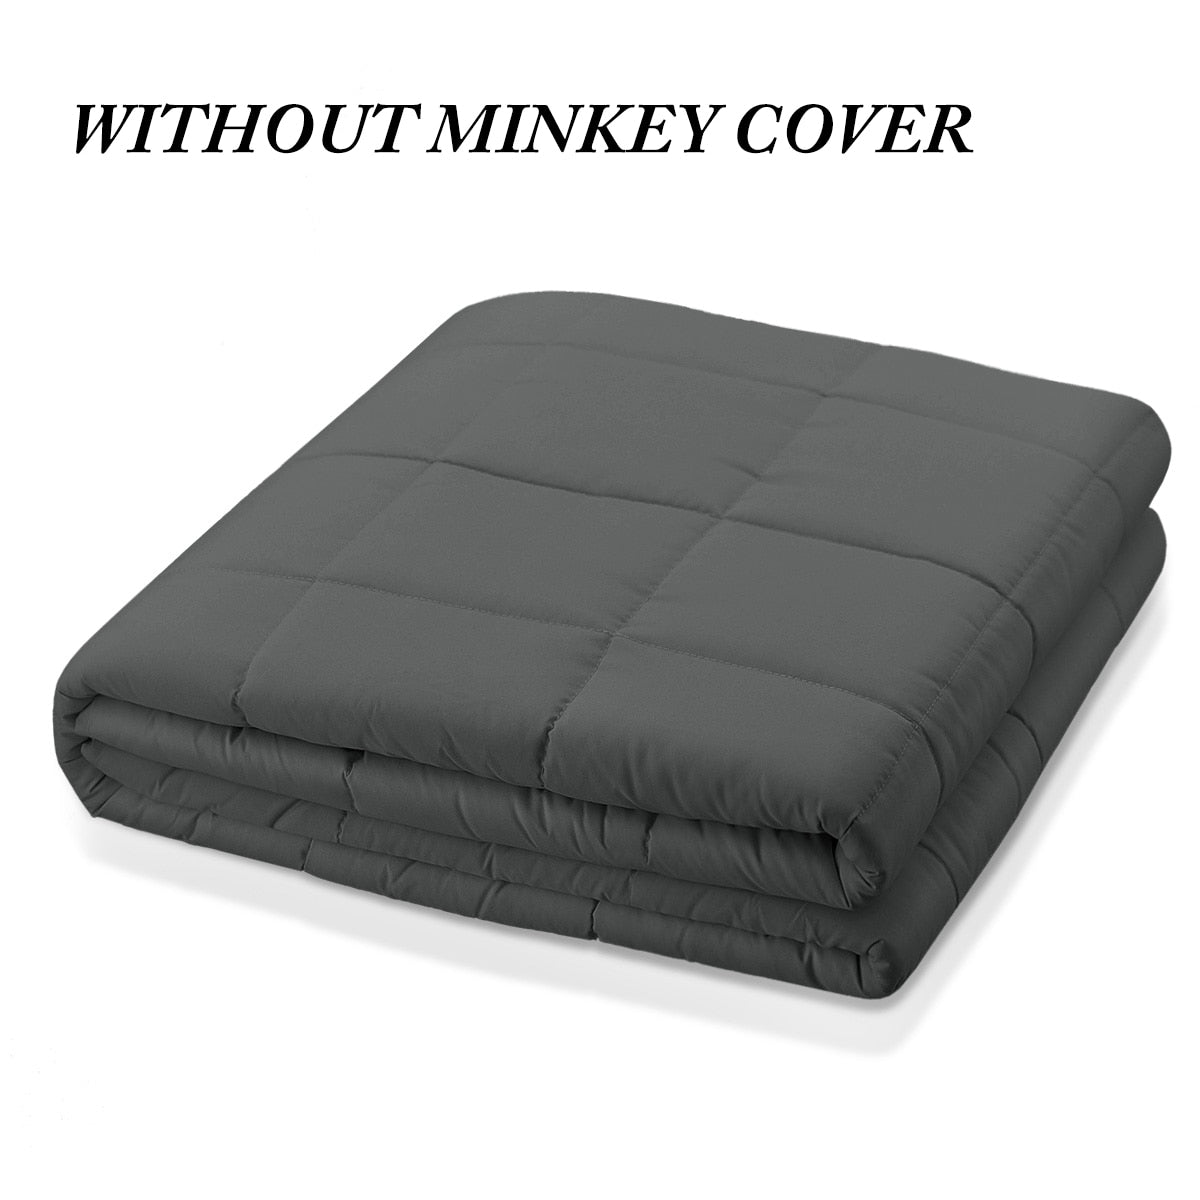 Weighted Cotton Blanket With Different Sizes